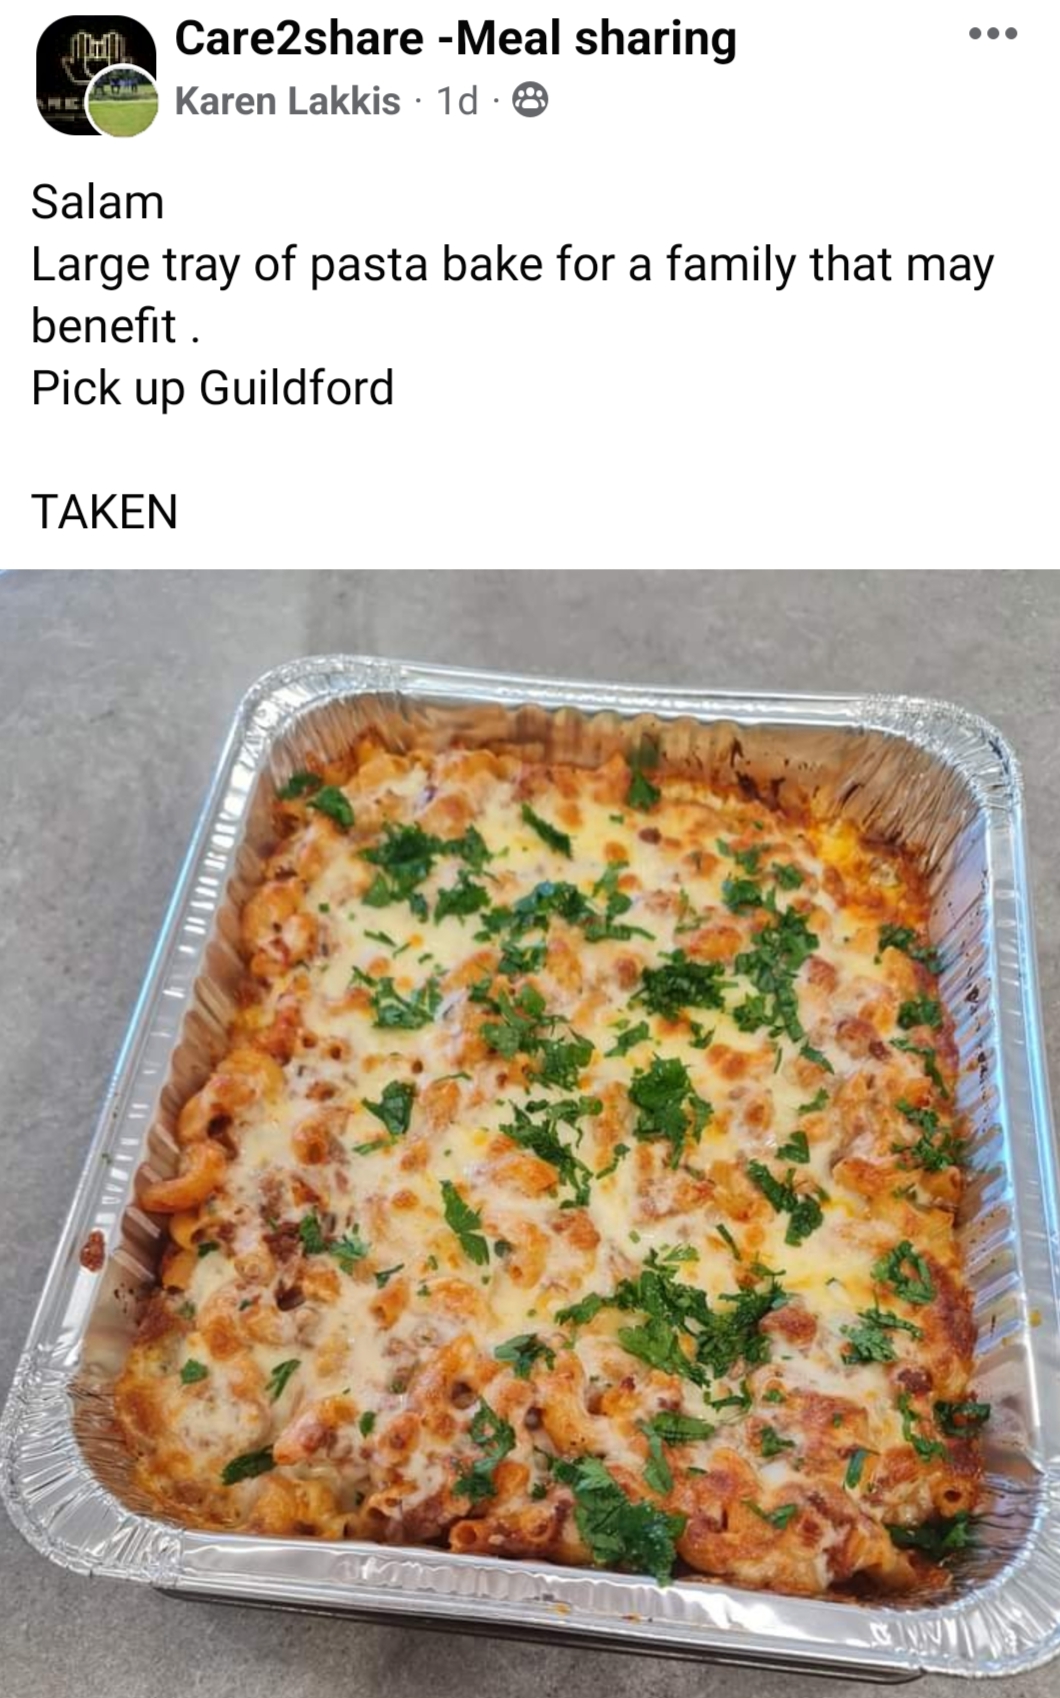 Photo of pasta meal on social media with text offering people to take it for free